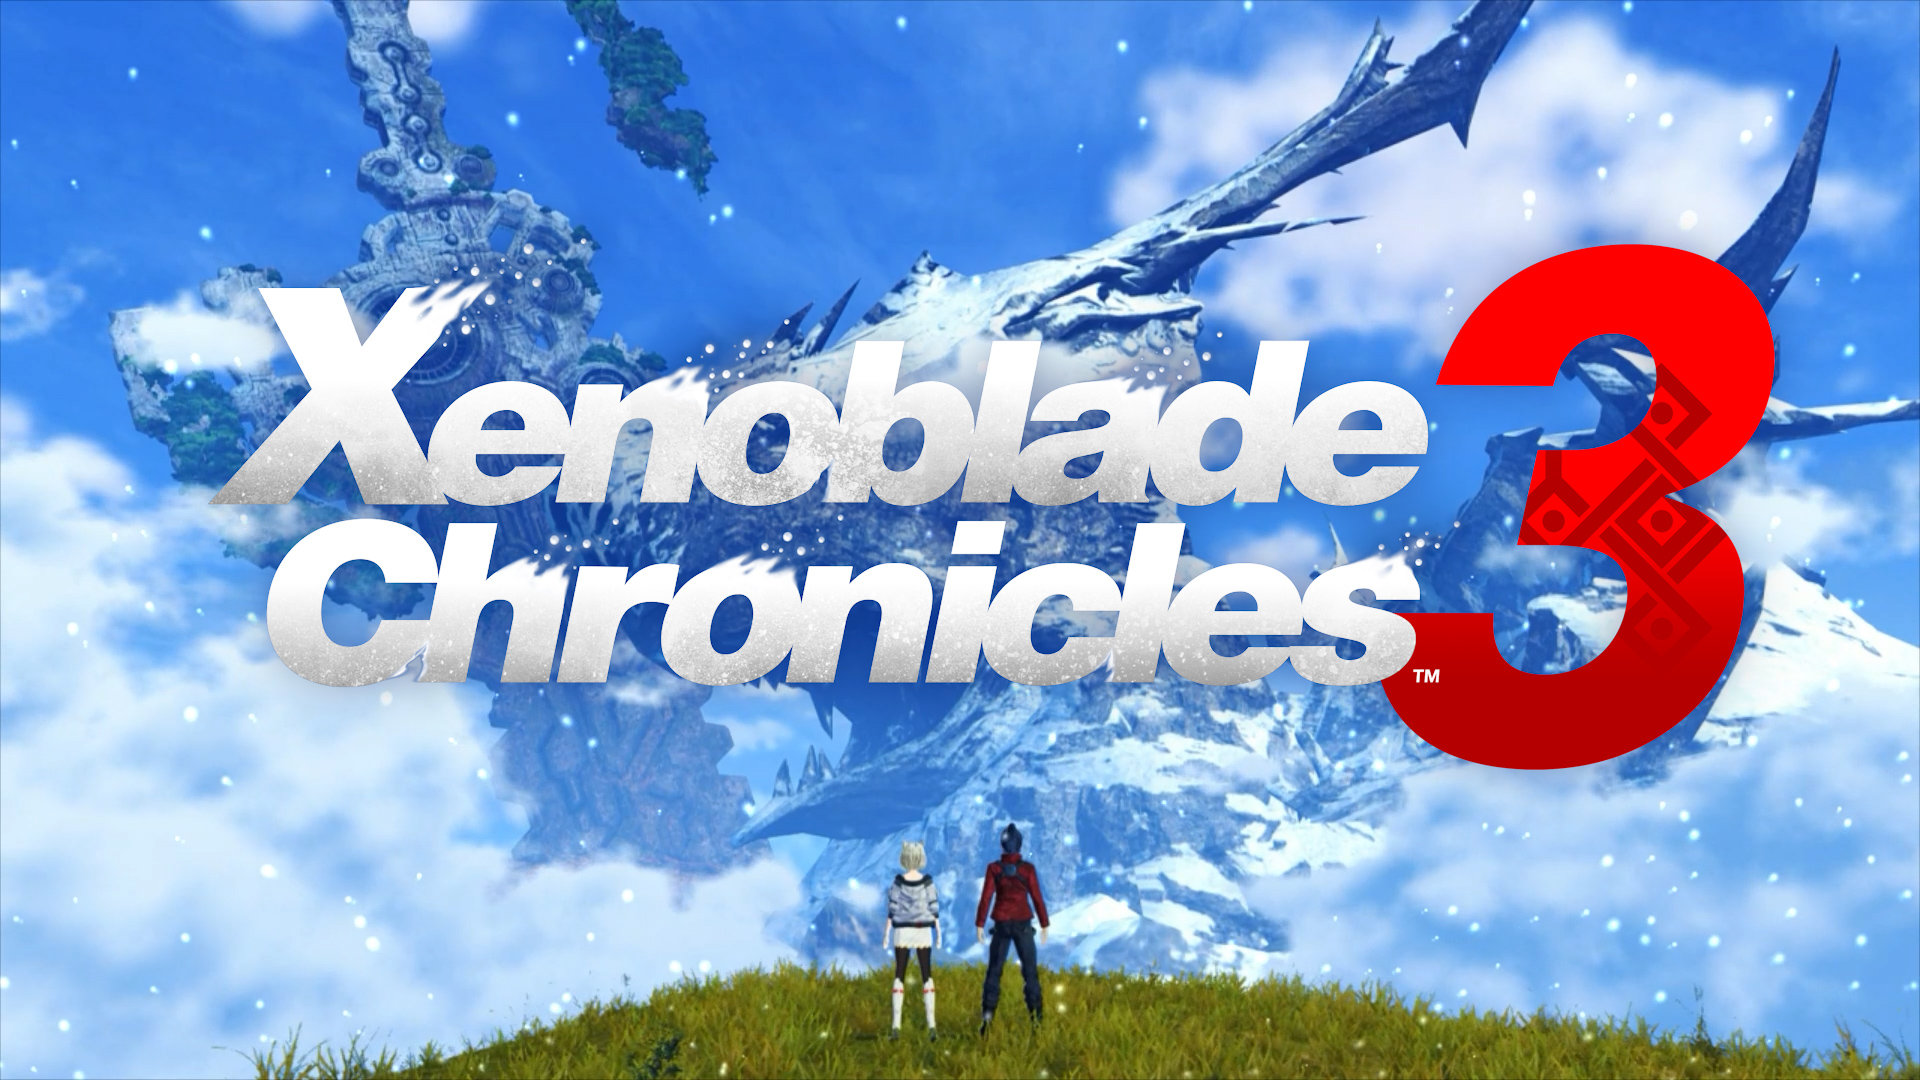 Nintendo's Been Dropping a Whole Lot of Xenoblade Chronicles 3 Info on Twitter